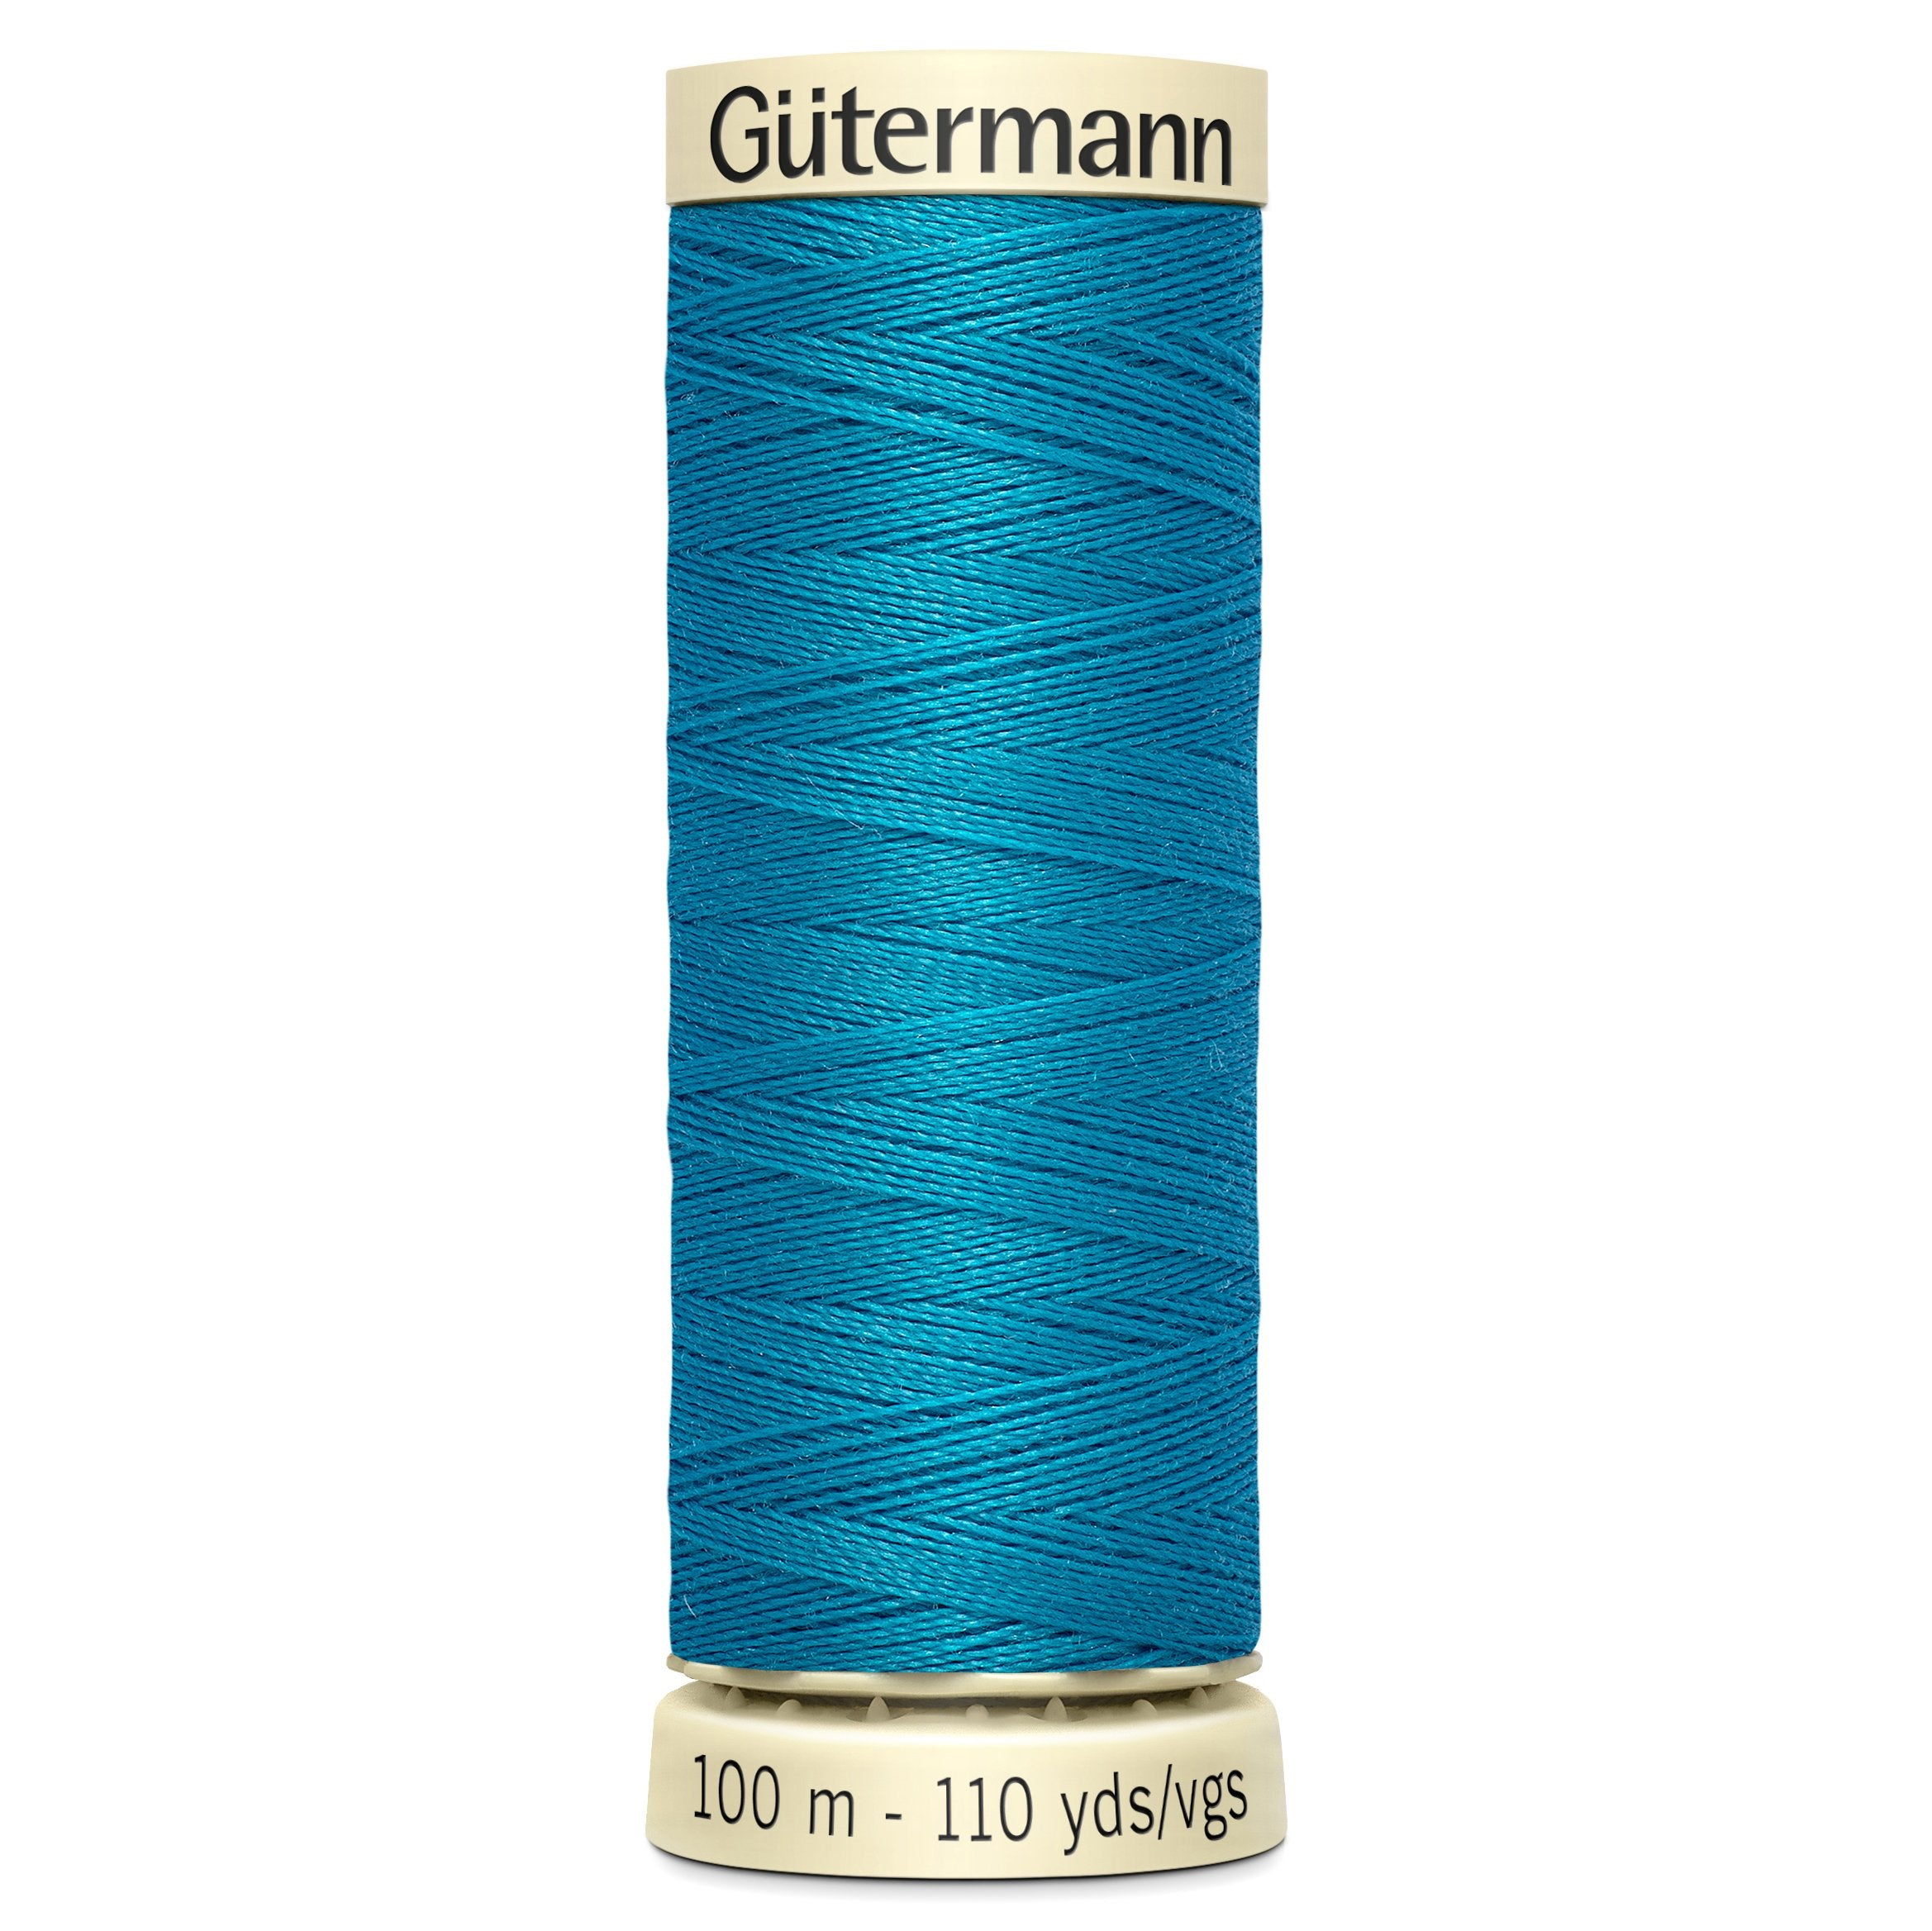 Gutermann Sew All Thread colour 761 Malibu Blue from Jaycotts Sewing Supplies